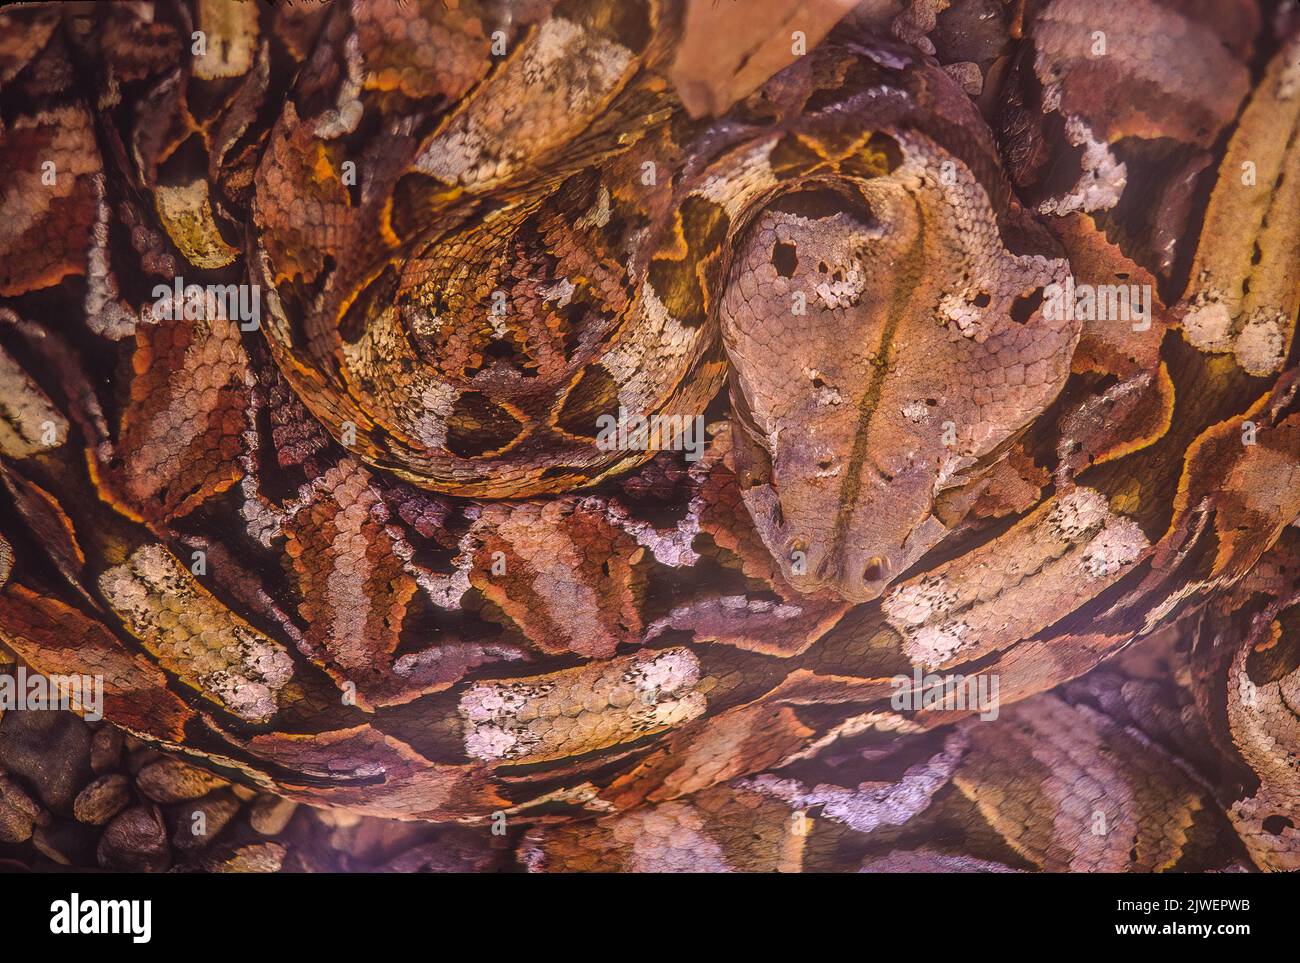 Gaboon viper, one of the deadliest snakes in the world, with potent venom and fangs up to 2 inches long. Stock Photo